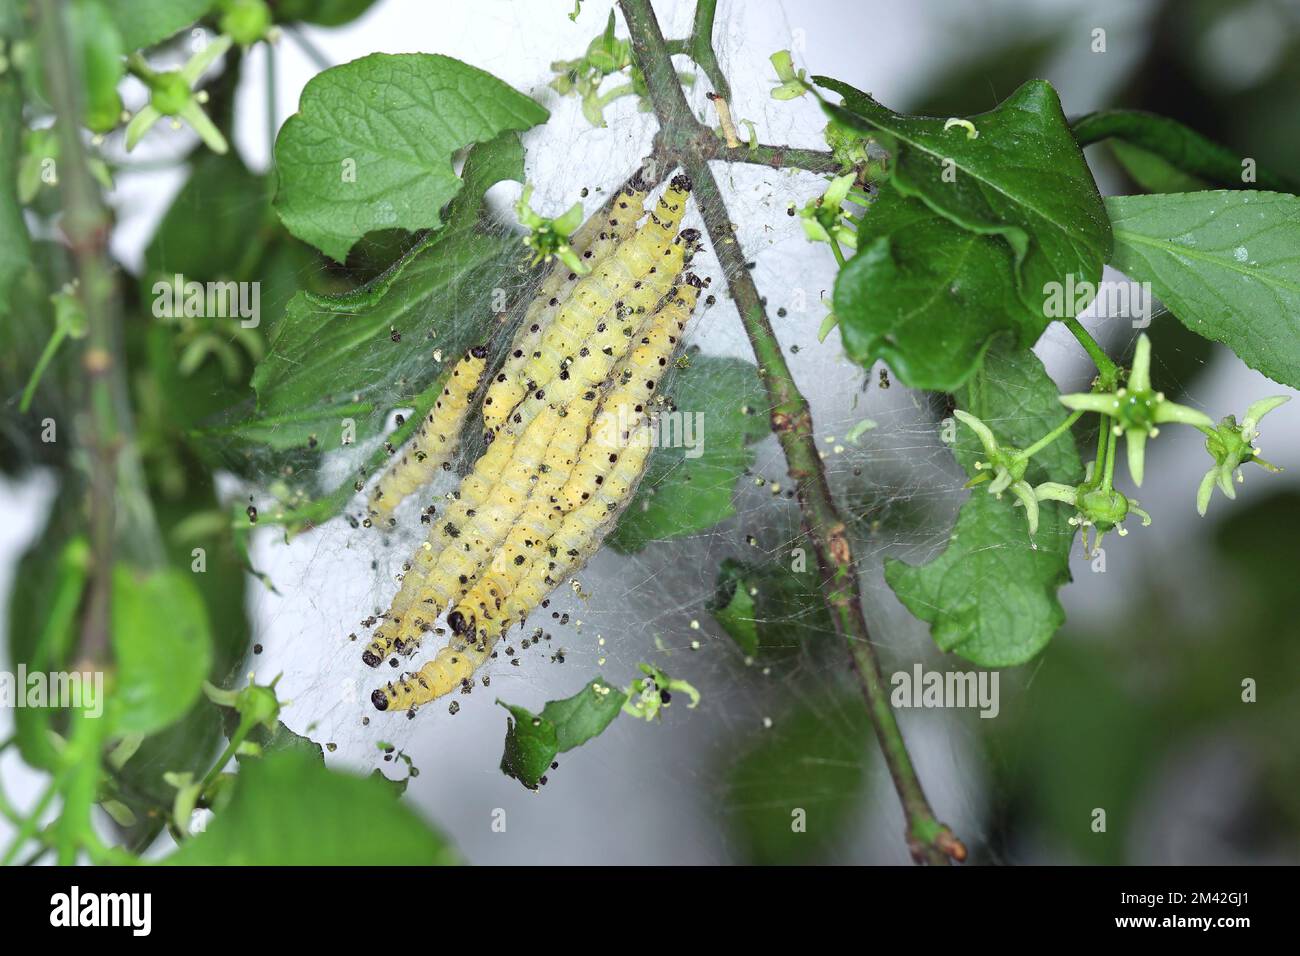 Group of Larvae of Bird-cherry ermine (Yponomeuta evonymella) pupate in tightly packed communal, white web on a tree trunk and branches. Stock Photo